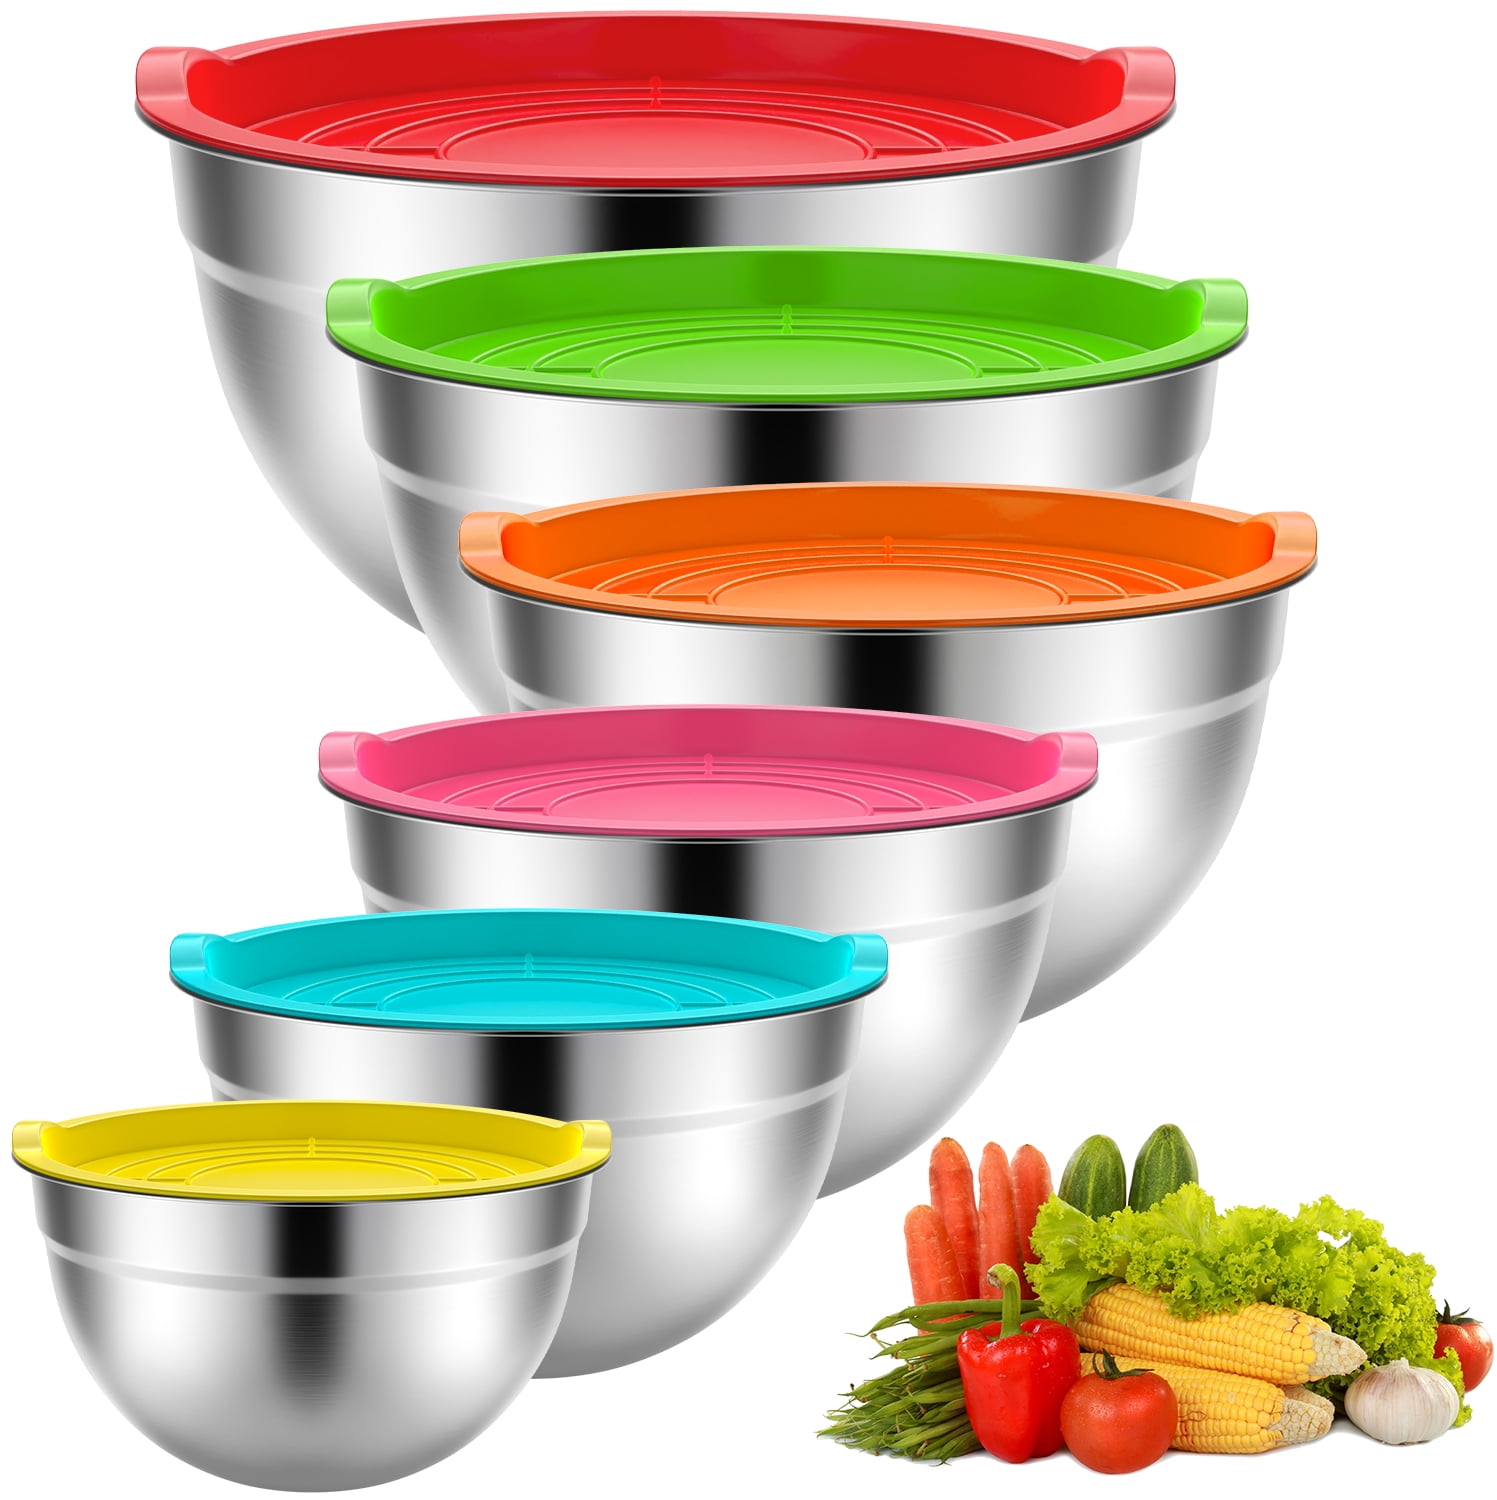 Choice 4 Qt. Standard Stainless Steel Mixing Bowl